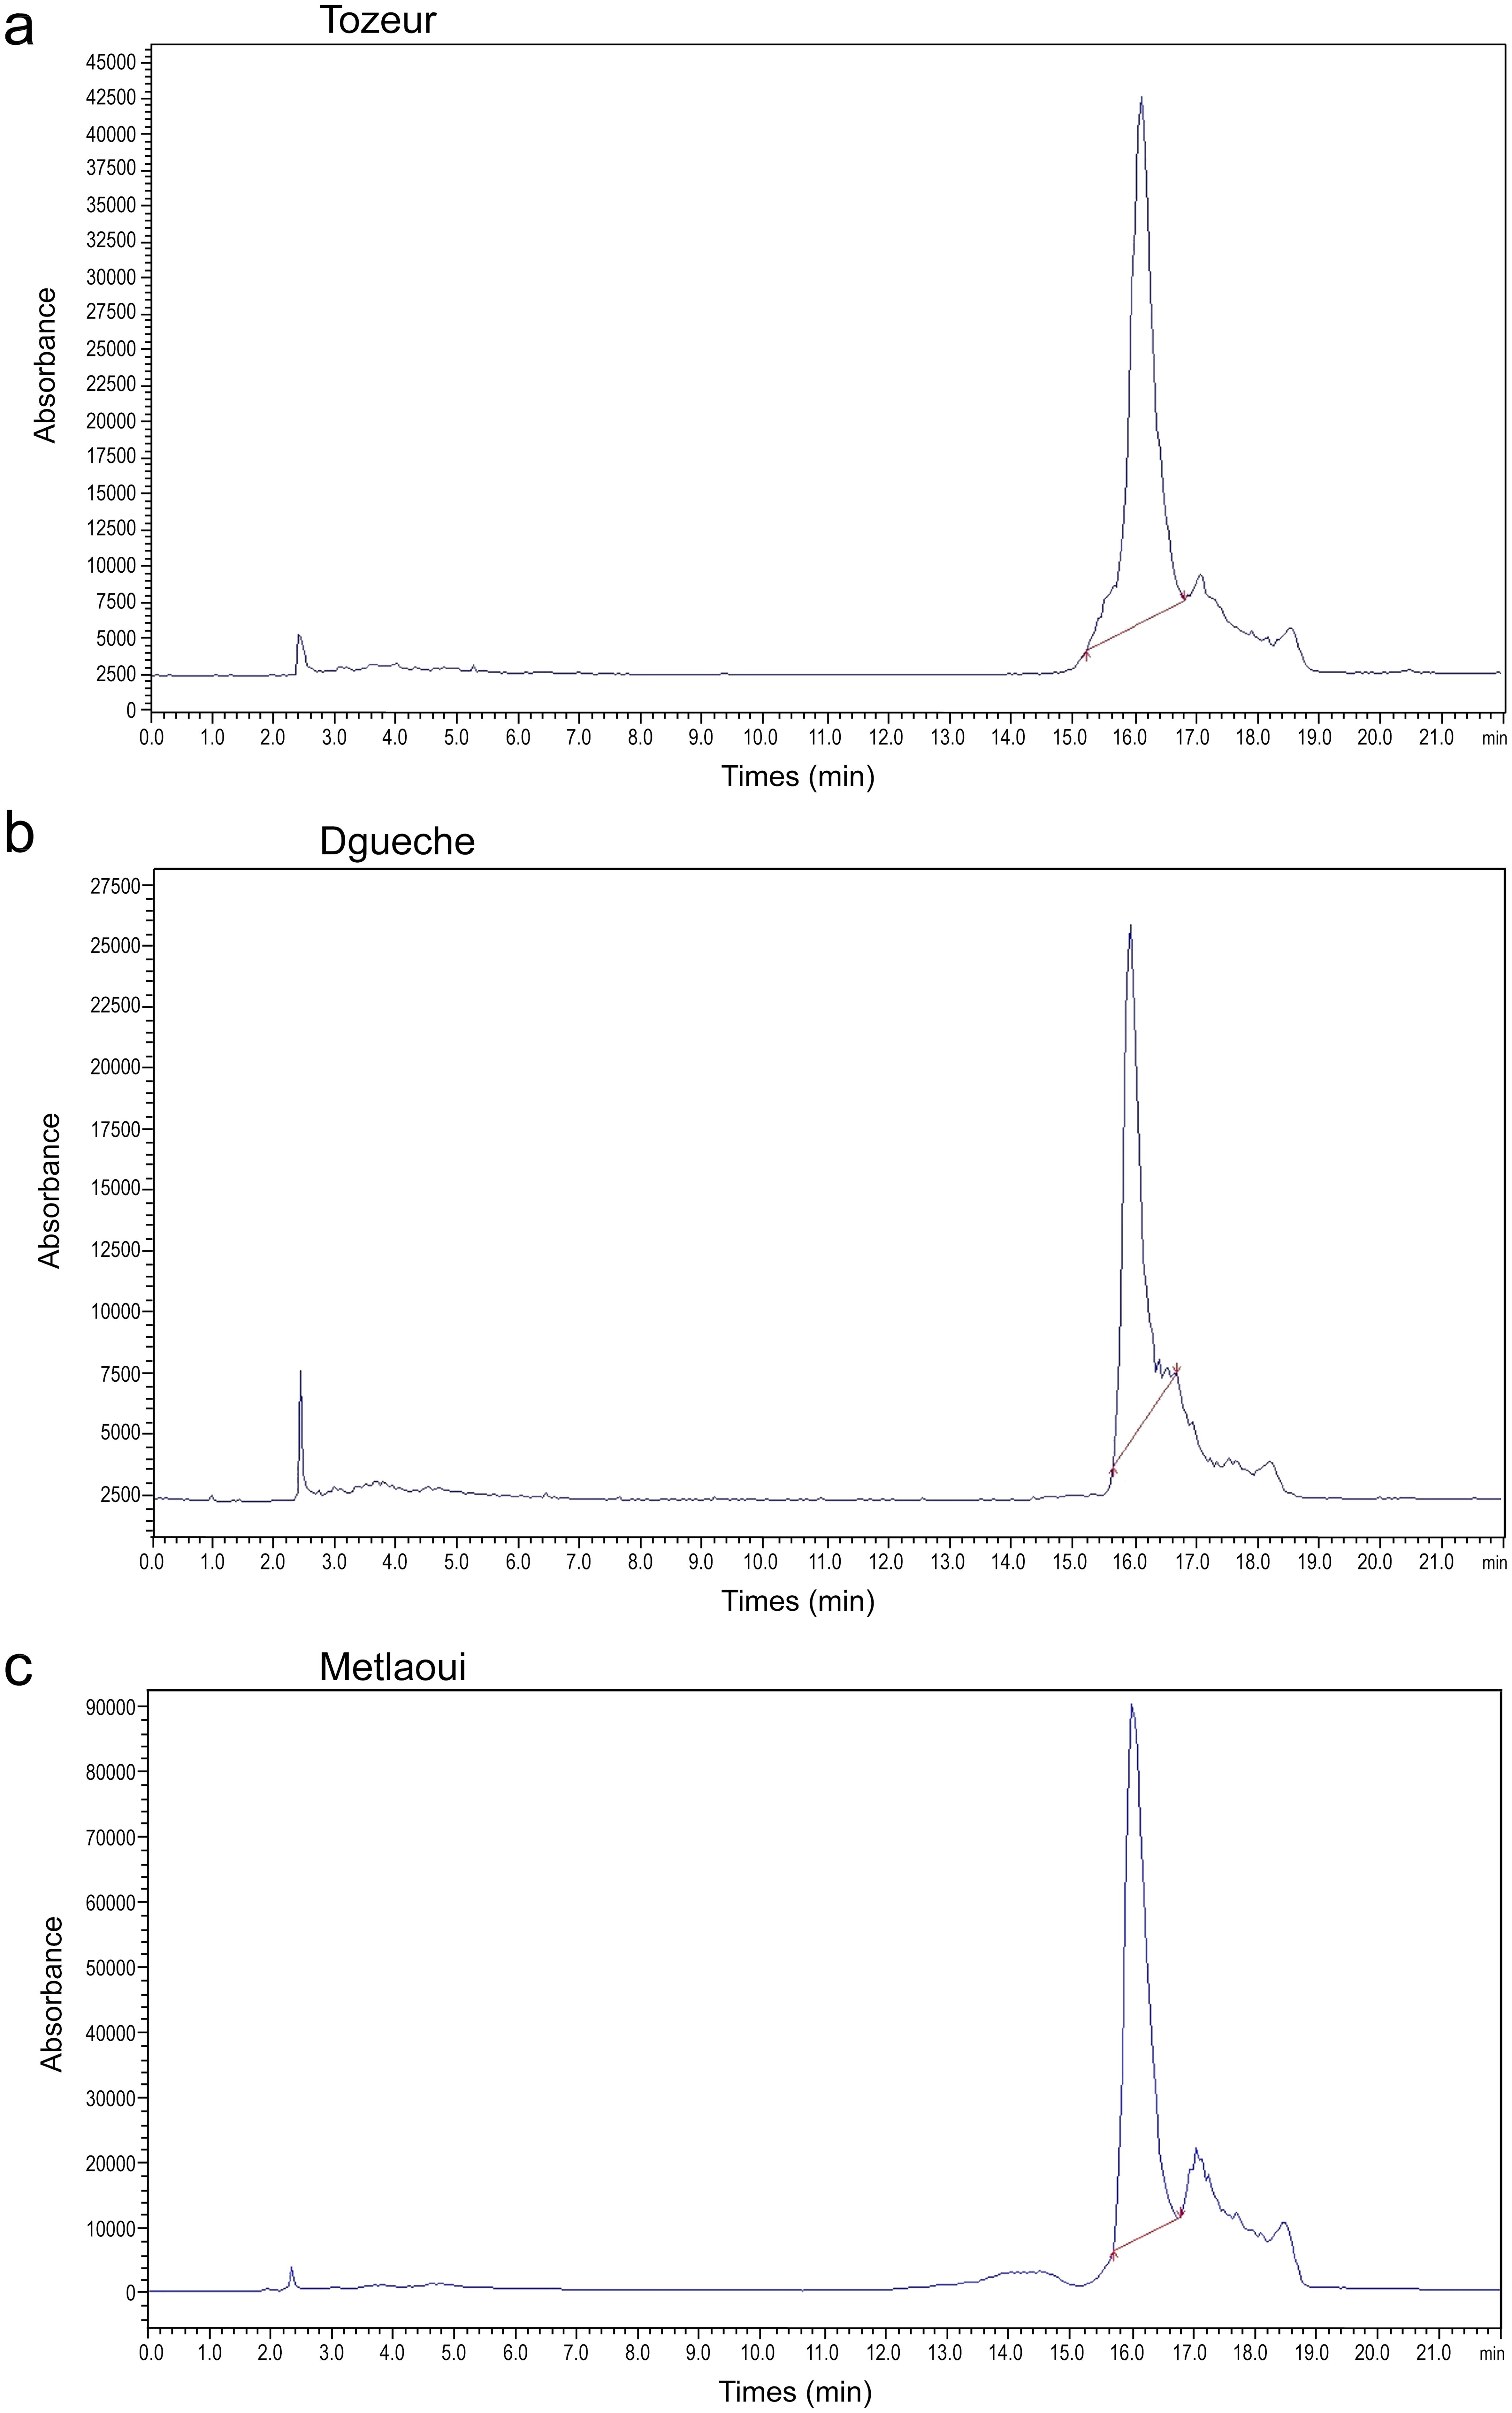 Identification and quantification of phenolic compounds in <italic>Z. spina-christi</italic> leaf extracts using LC-ESI-MS analysis.